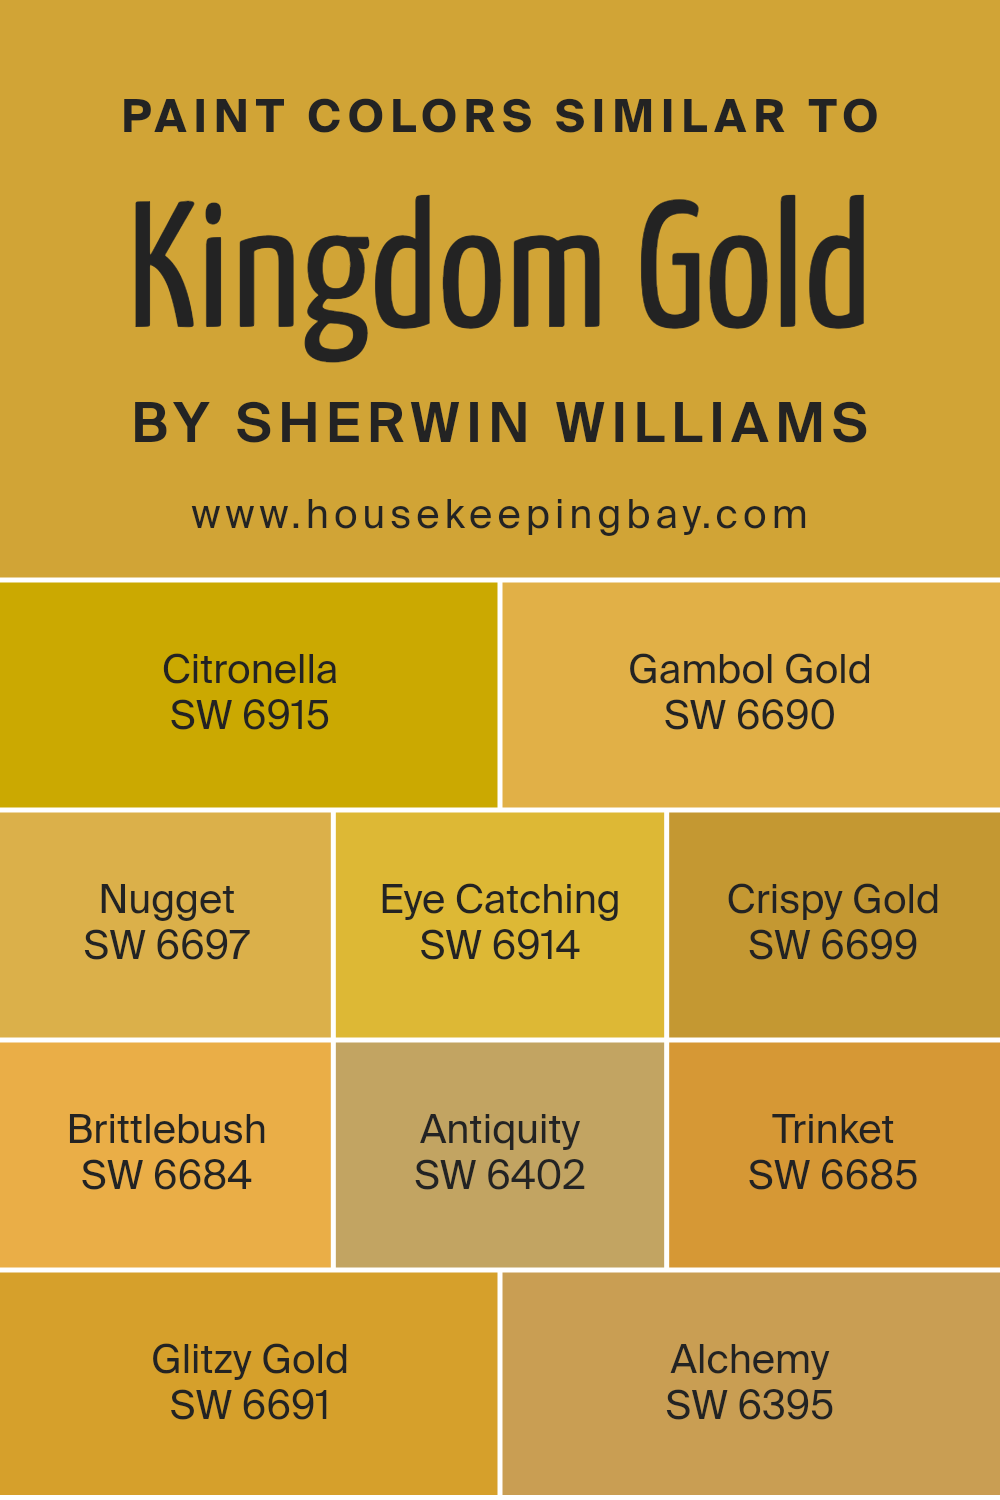 colors_similar_to_kingdom_gold_sw_6698